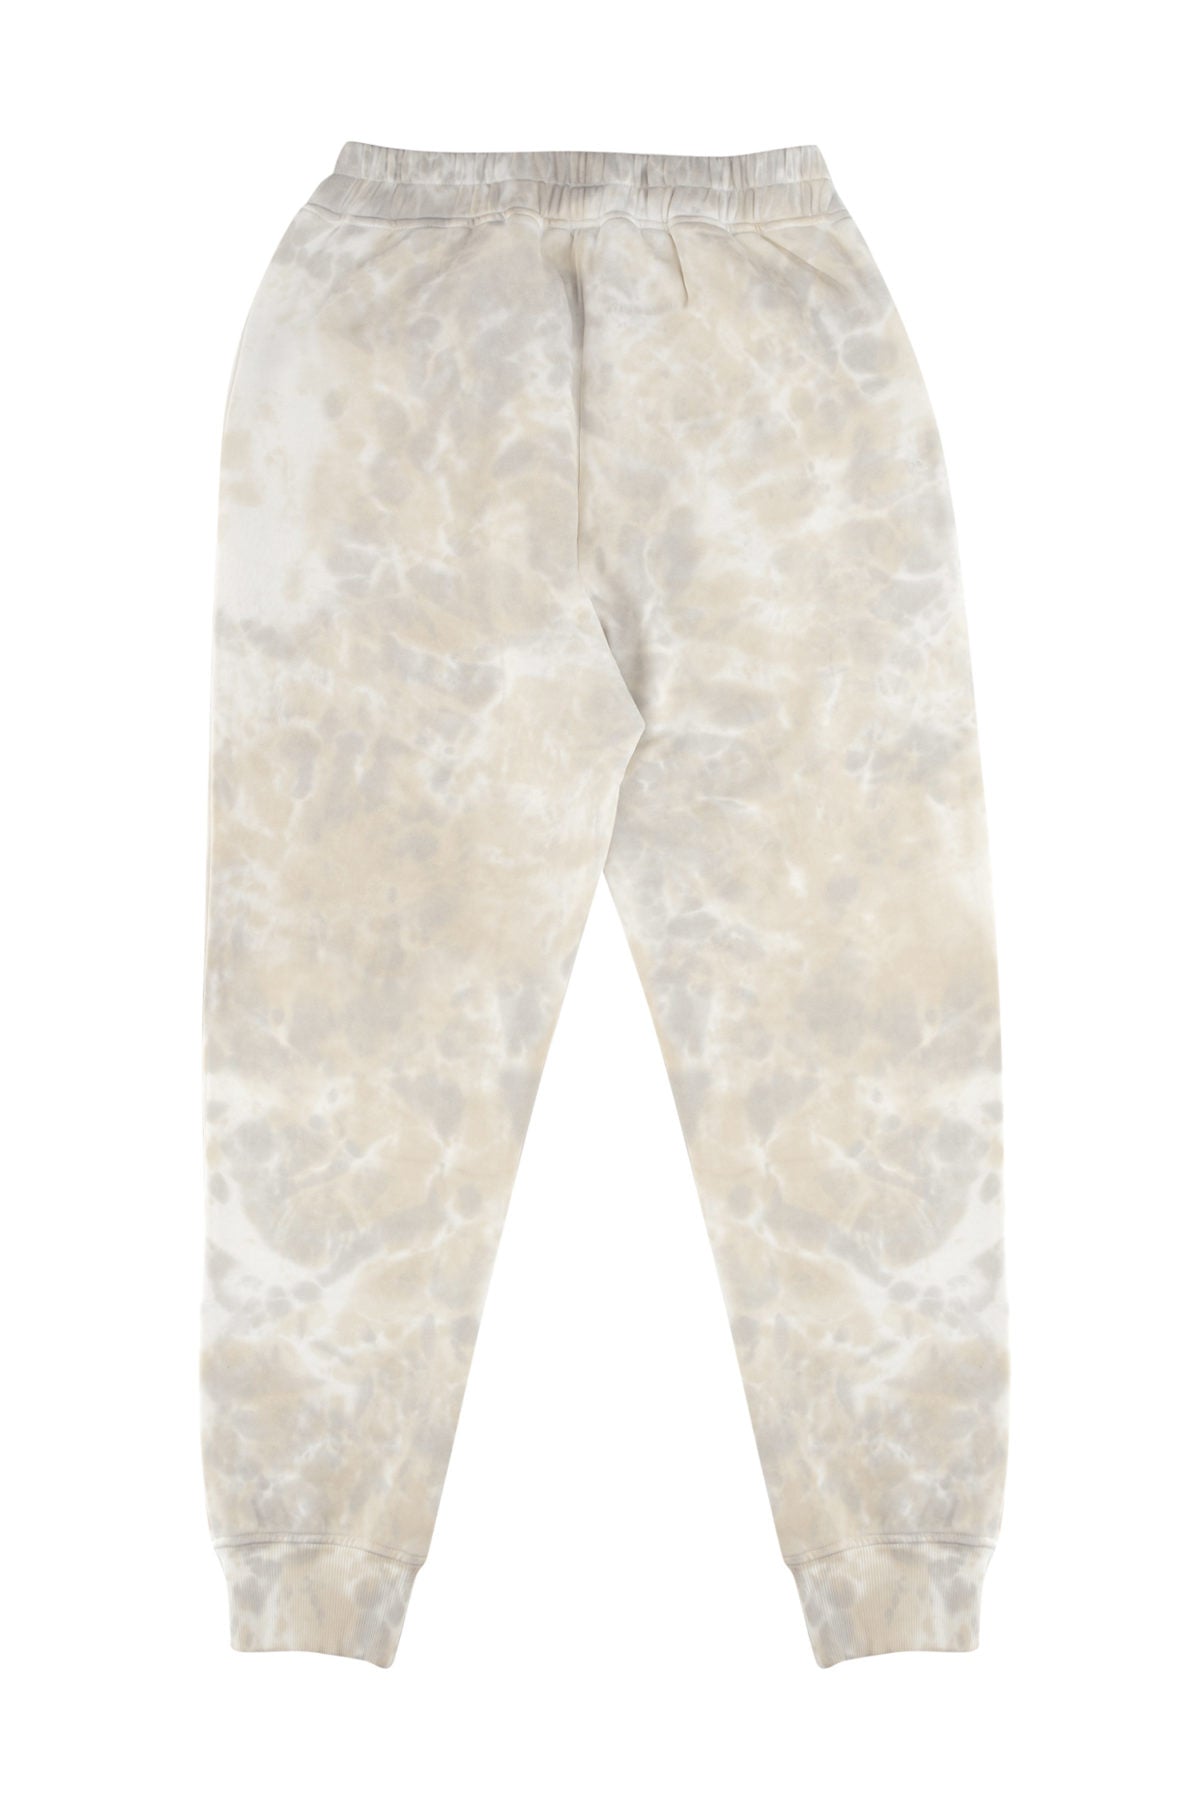 Load image into Gallery viewer, Cotton Relax Sweatpants - Bubbles
